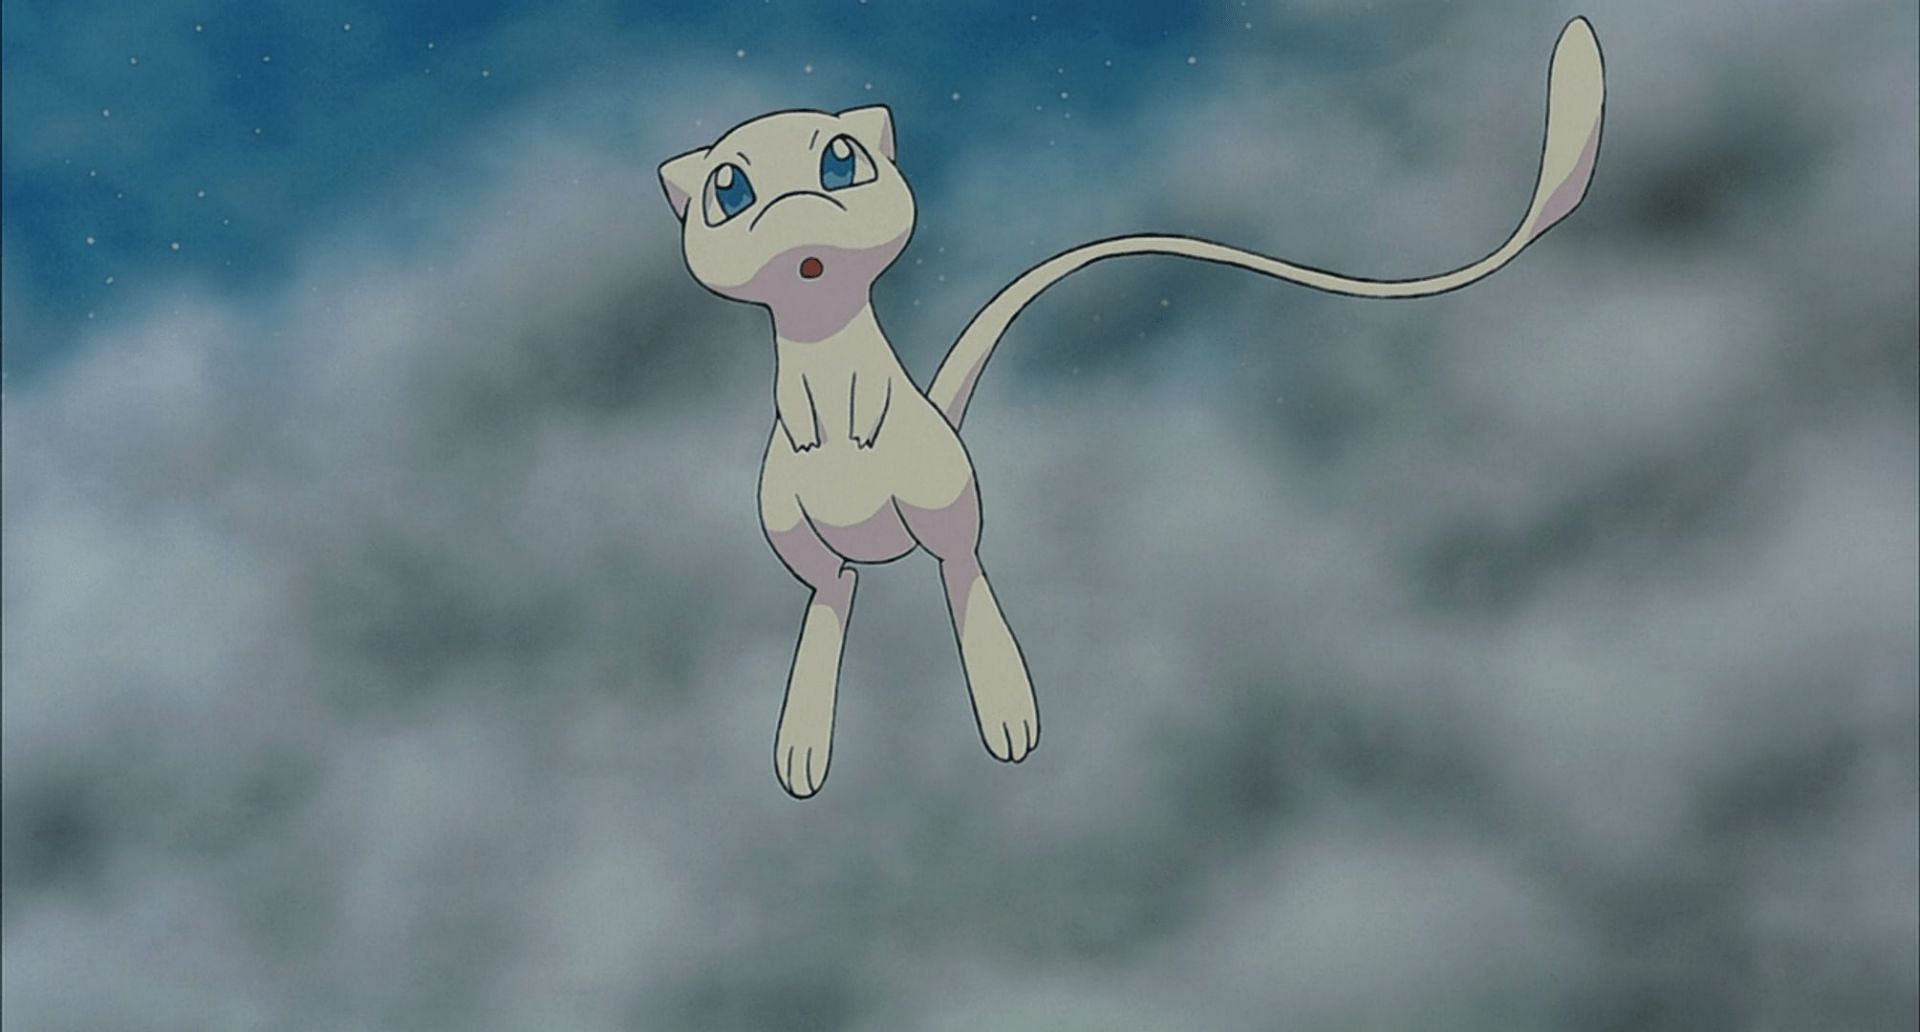 Mew, as it appears in the &#039;Pokemon&#039; movie (Image via The Pokemon Company)